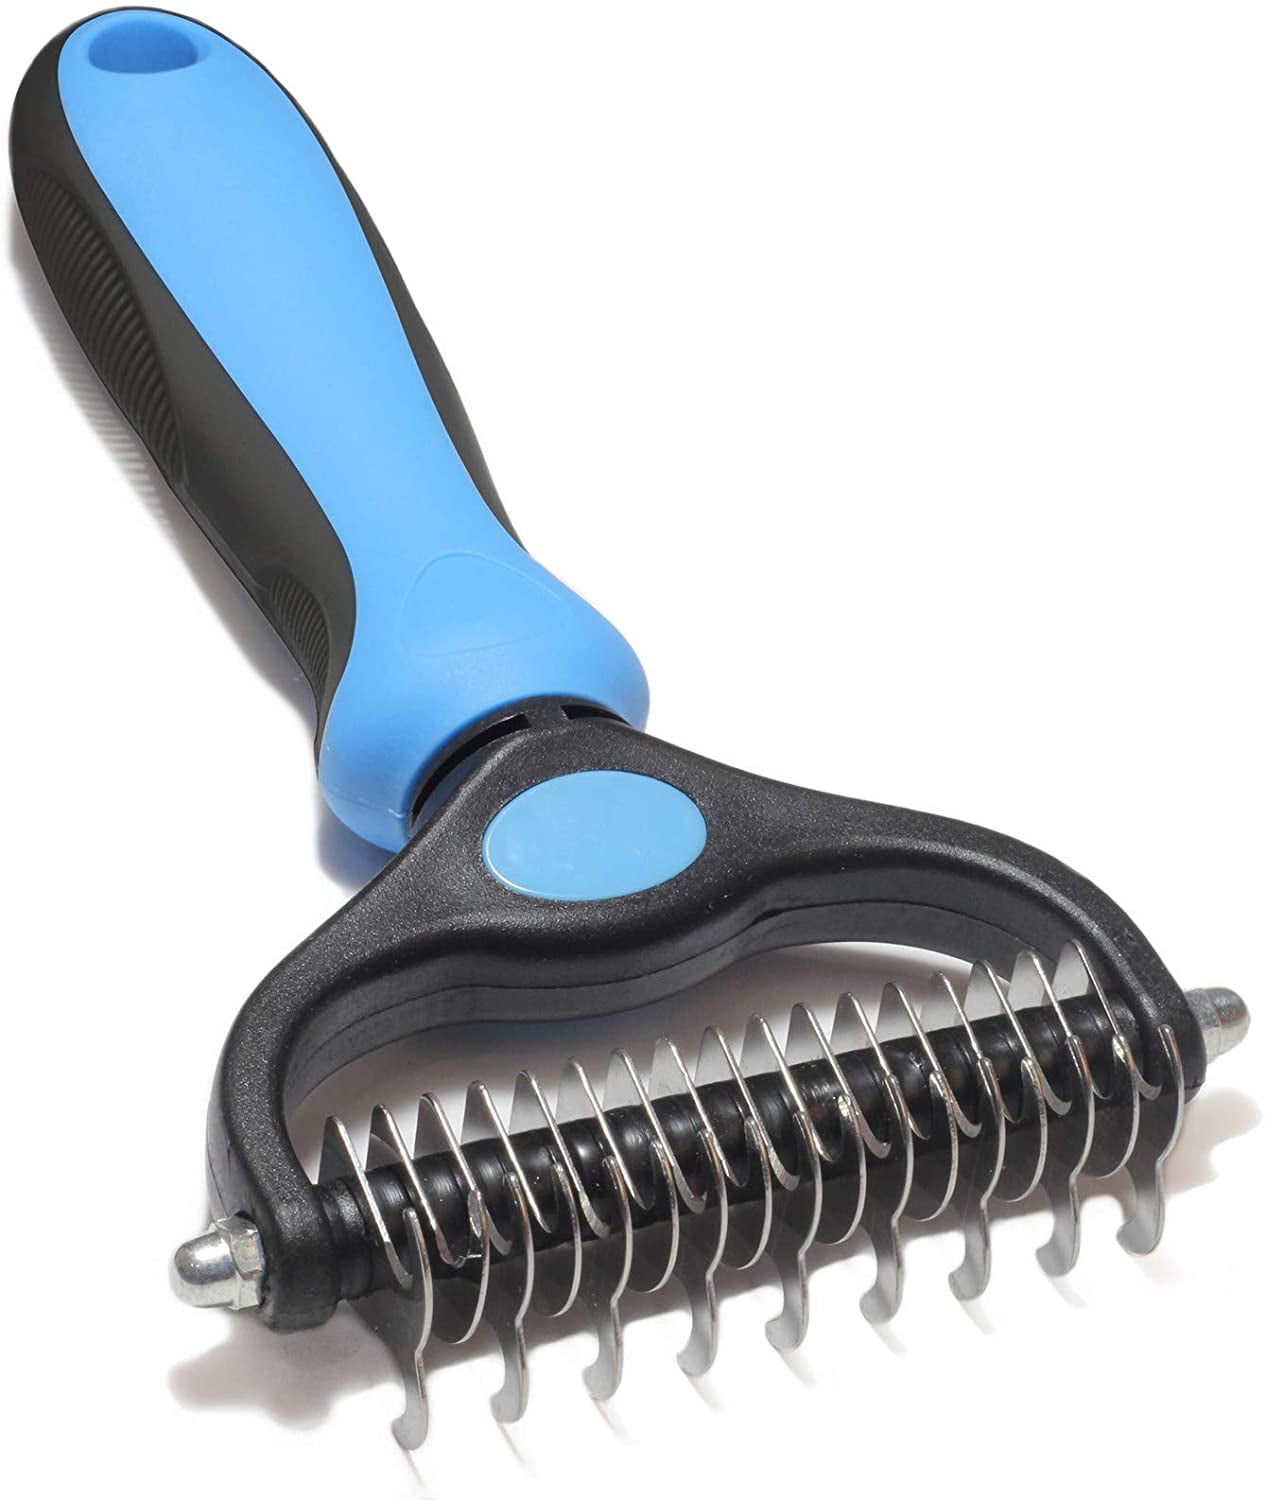 Uncover the Ultimate Buying Guide for Pet Food: Top 10 Dog Rake Combs ...